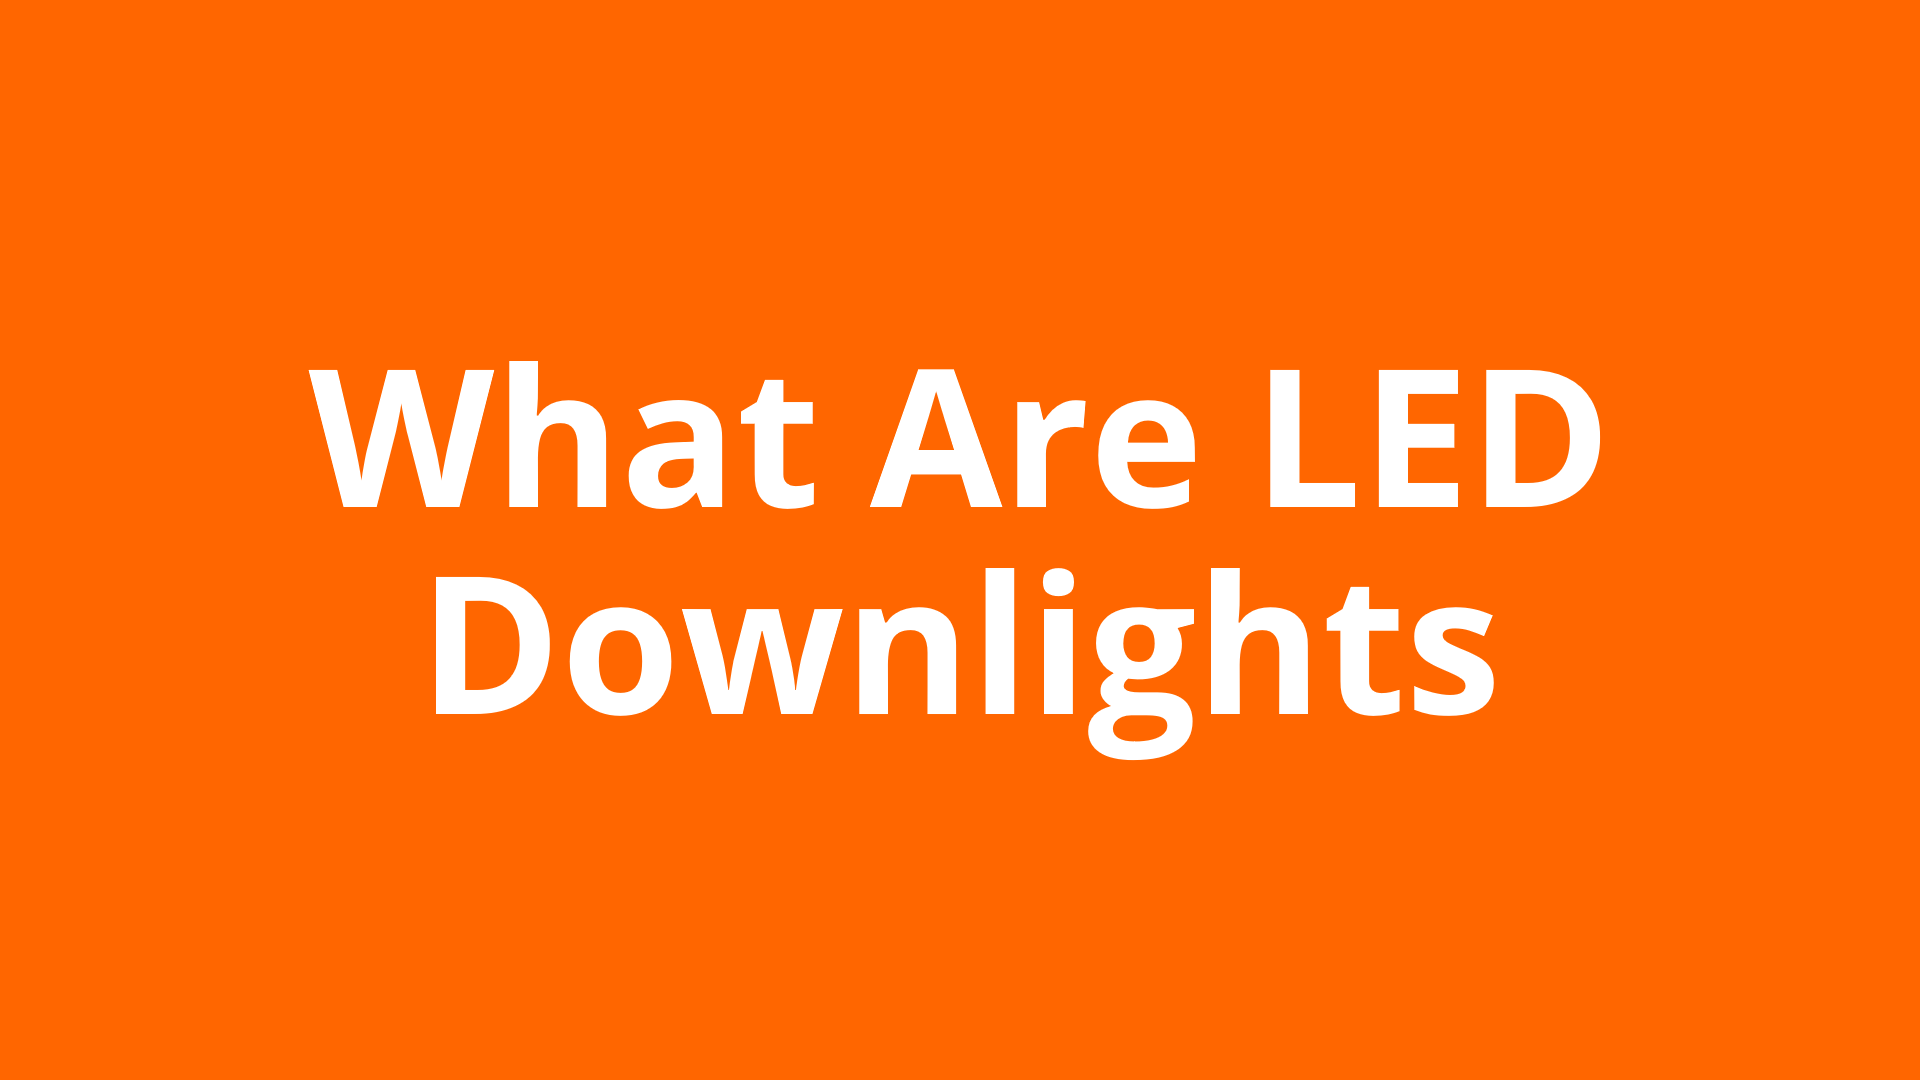 What Are LED Downlights?